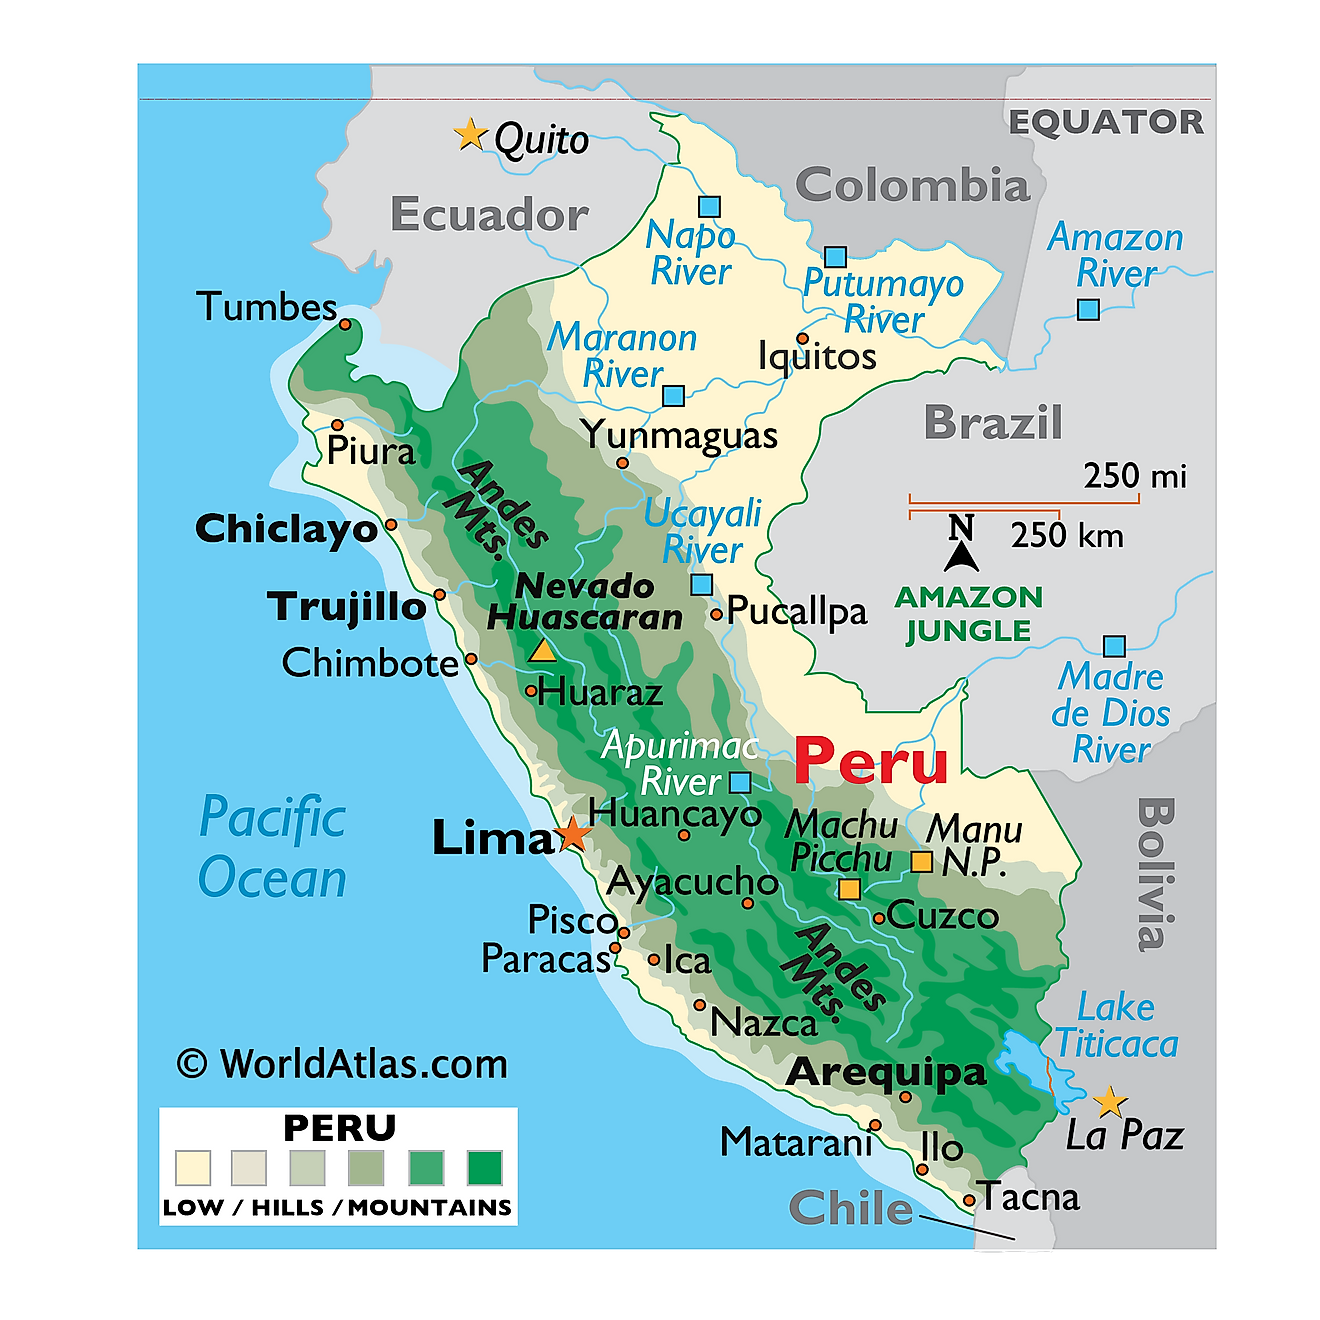 Physical Map of Peru showing relief, mountains, major rivers, Lake Titicaca, important cities, neighbouring countries, etc.